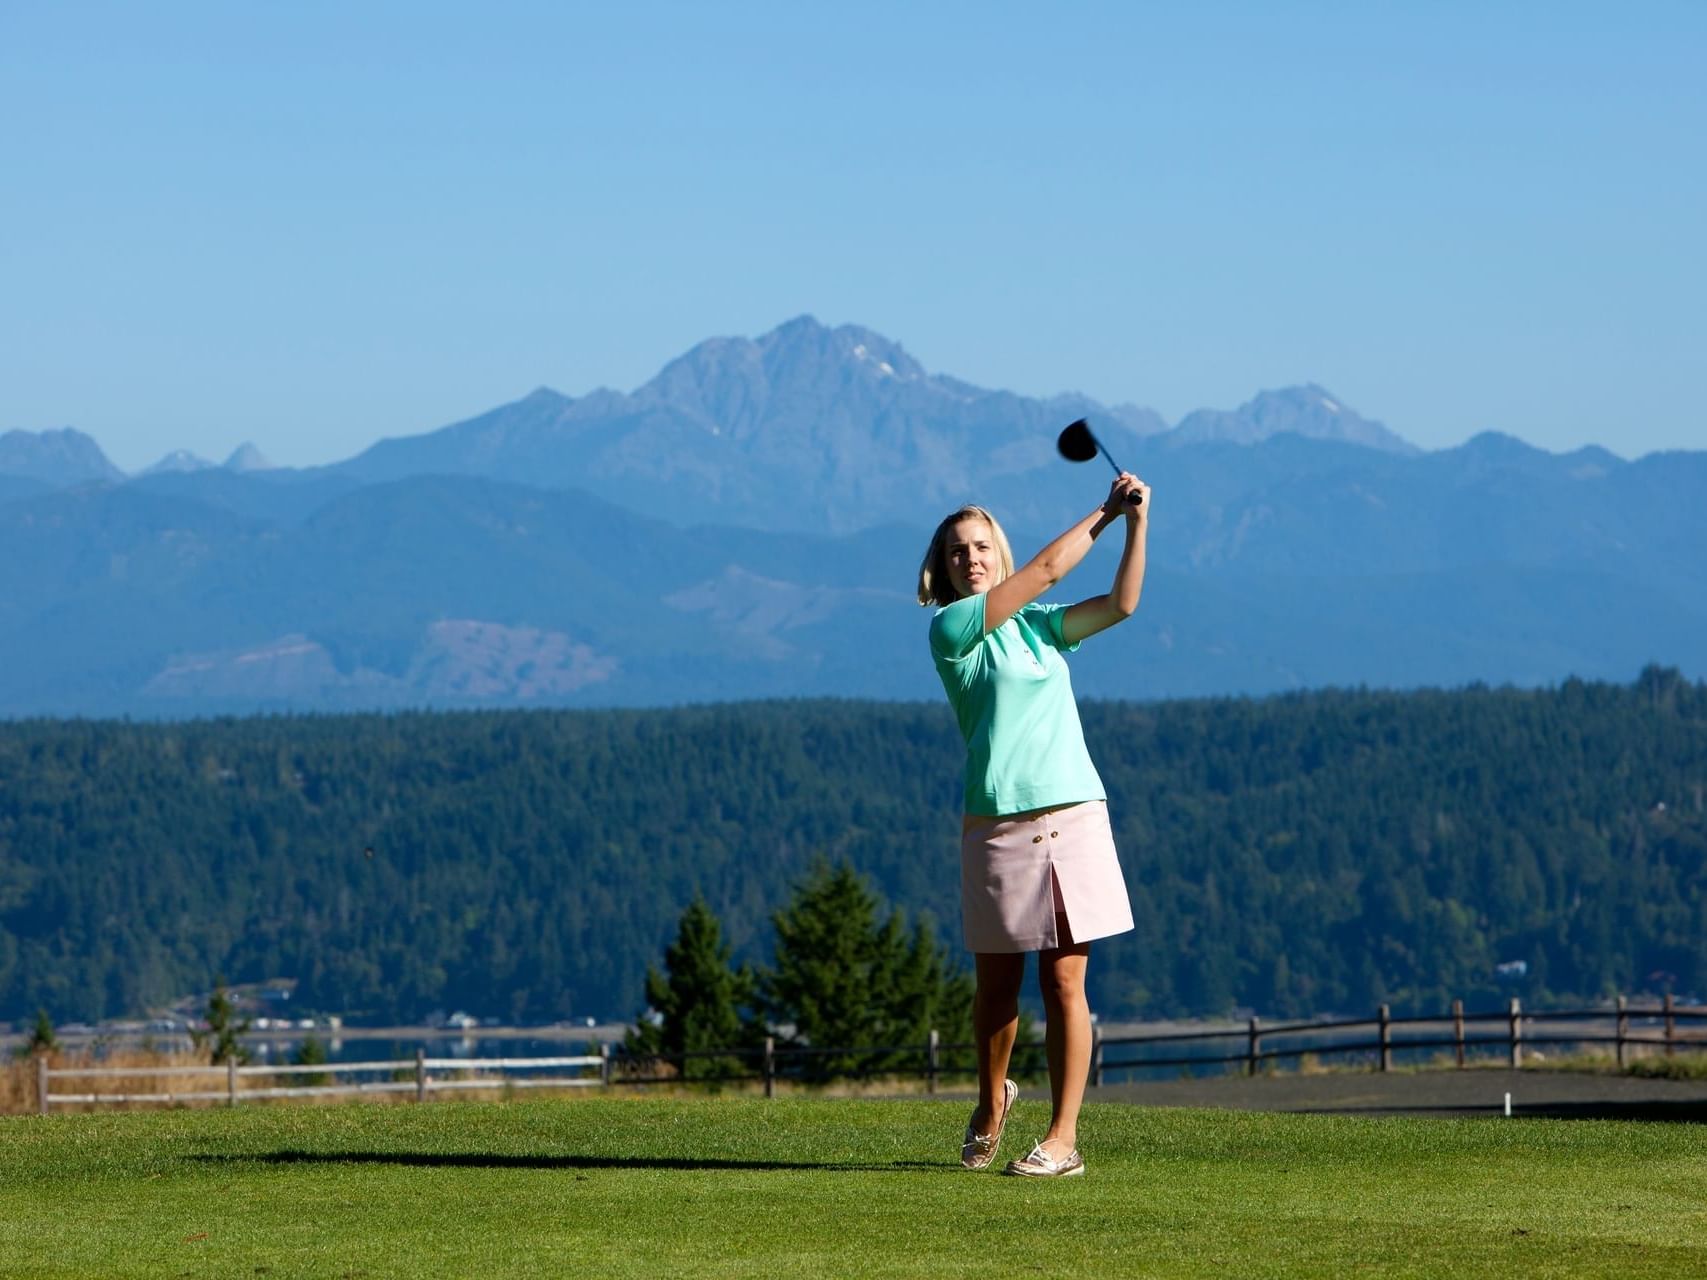 Lady playing golf on a course near Alderbrook Resort & Spa